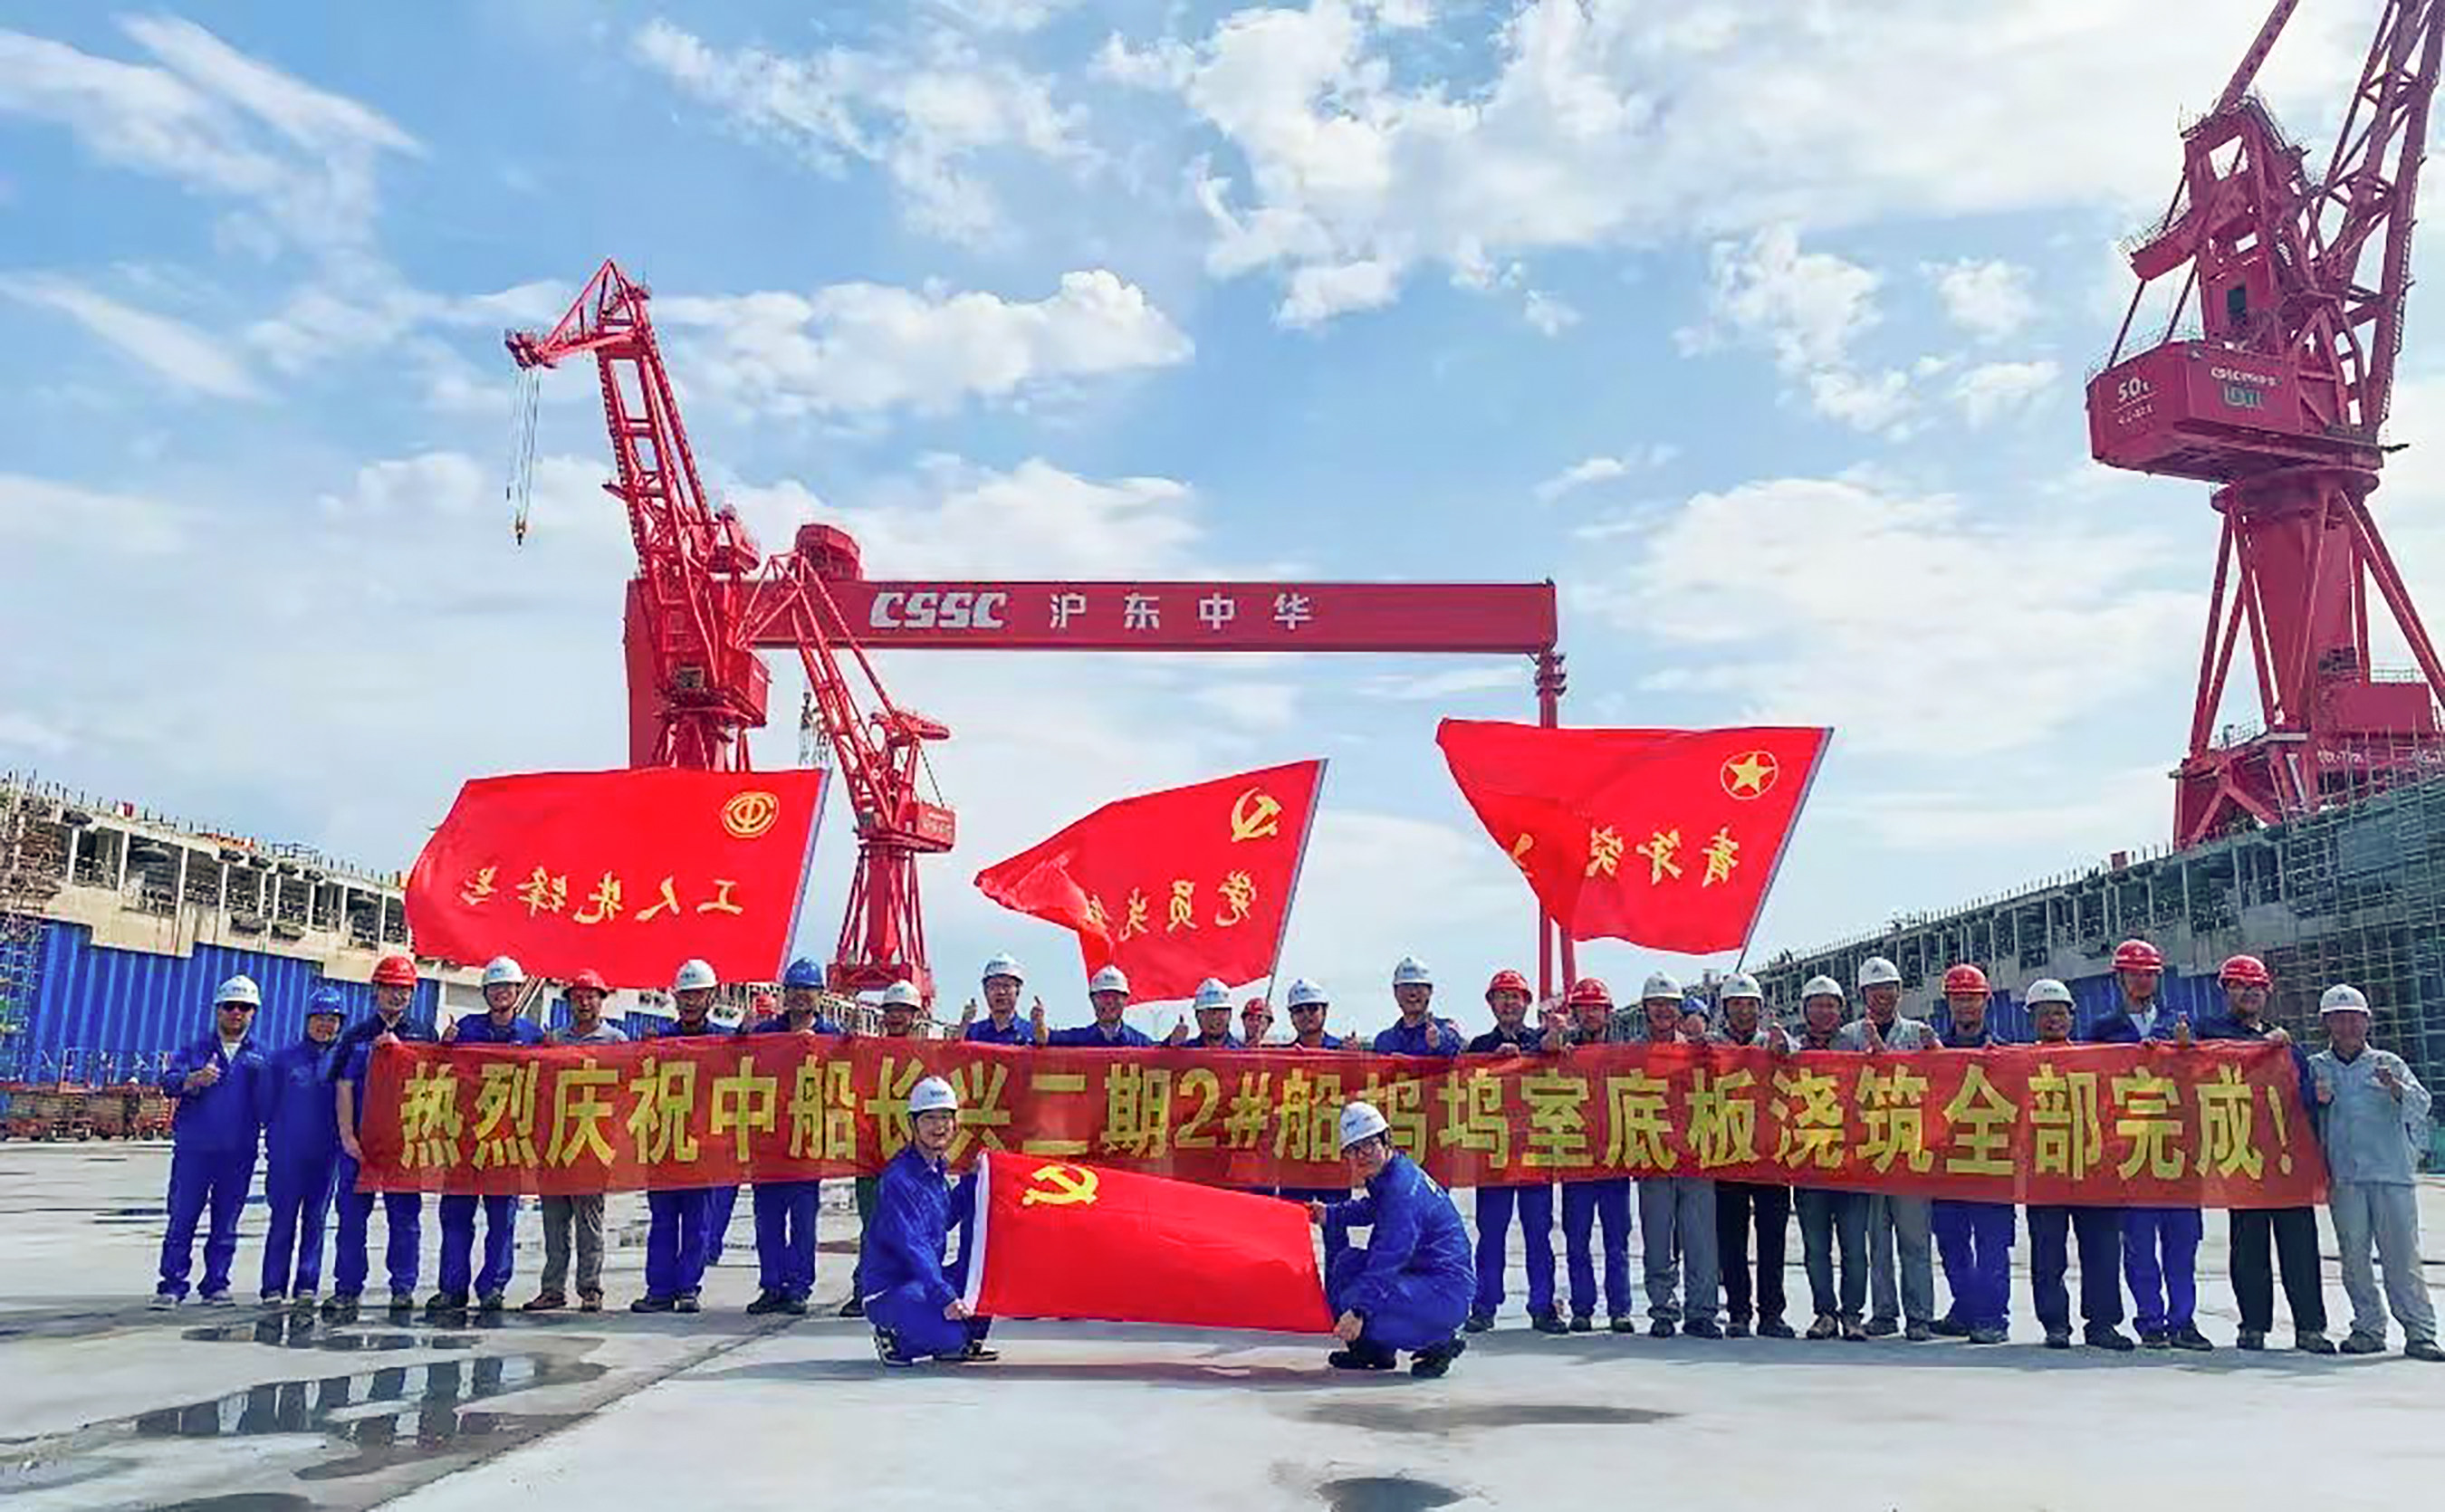 Workers at the Hudong-Zhonghua shipyard posted a picture on Weibo to mark  the end of concreting the floor of a new dry dock in the shipyard on Changxing Island. Photo: Weibo